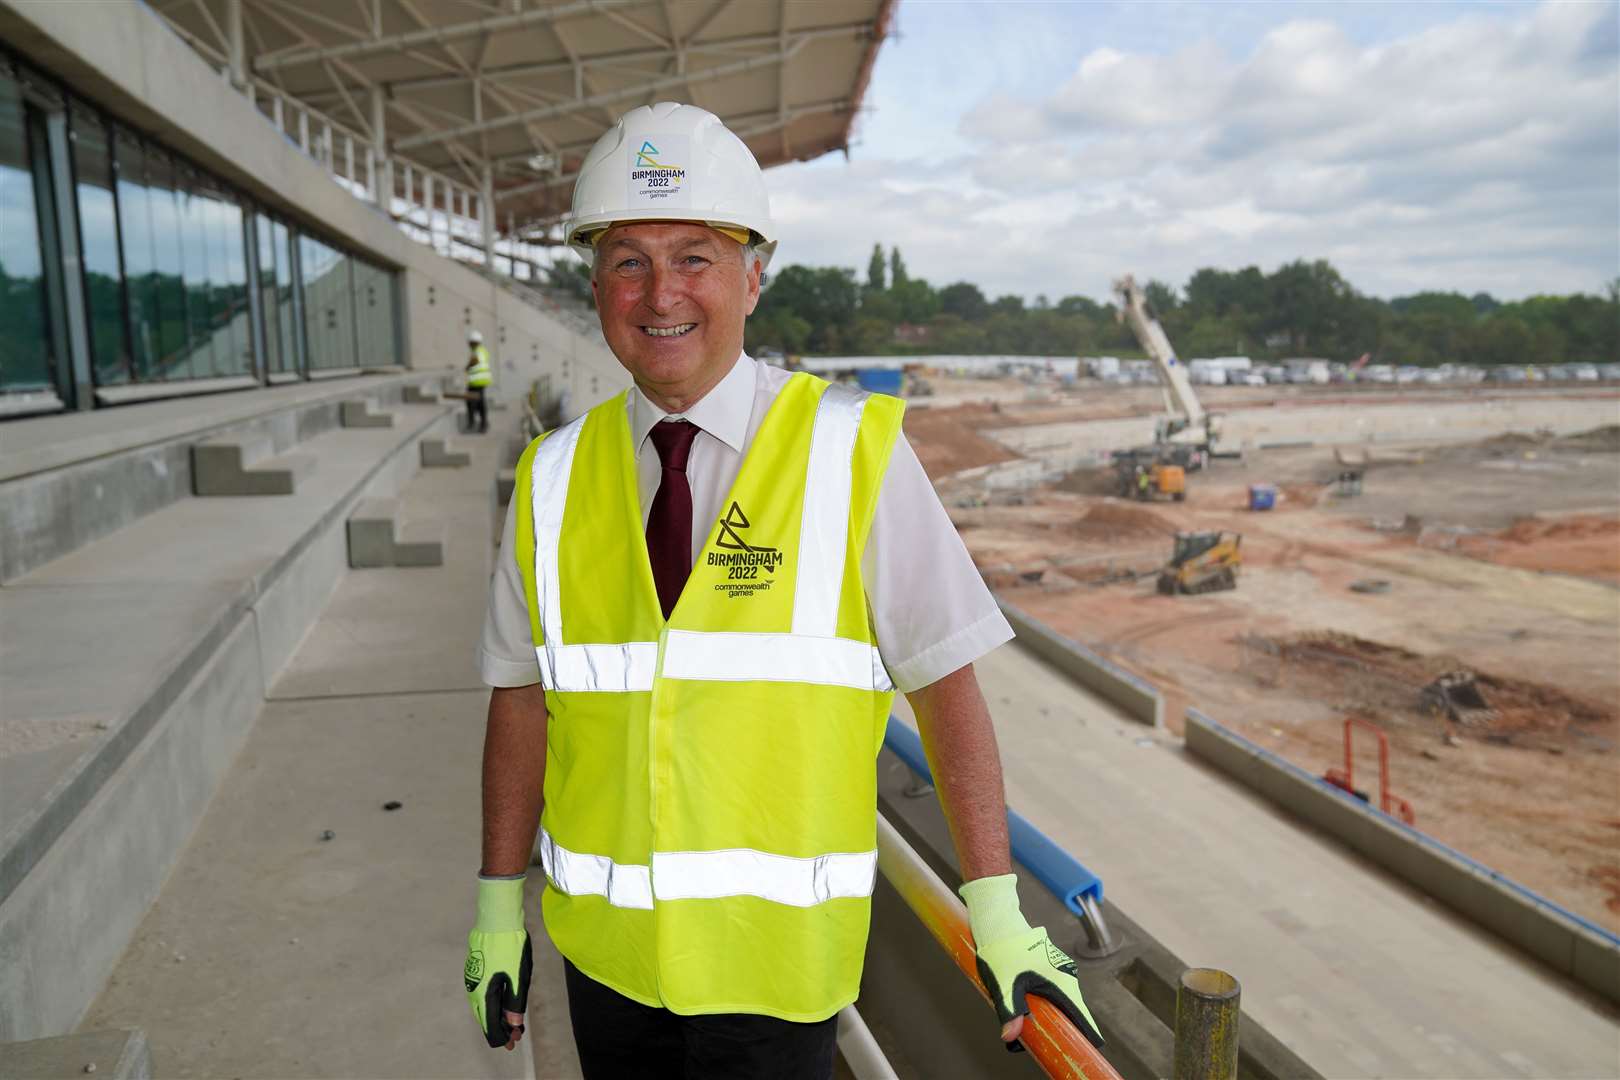 Ian Ward at the Alexander Stadium during building work before the 2022 Commonwealth Games (Jacob King/PA)